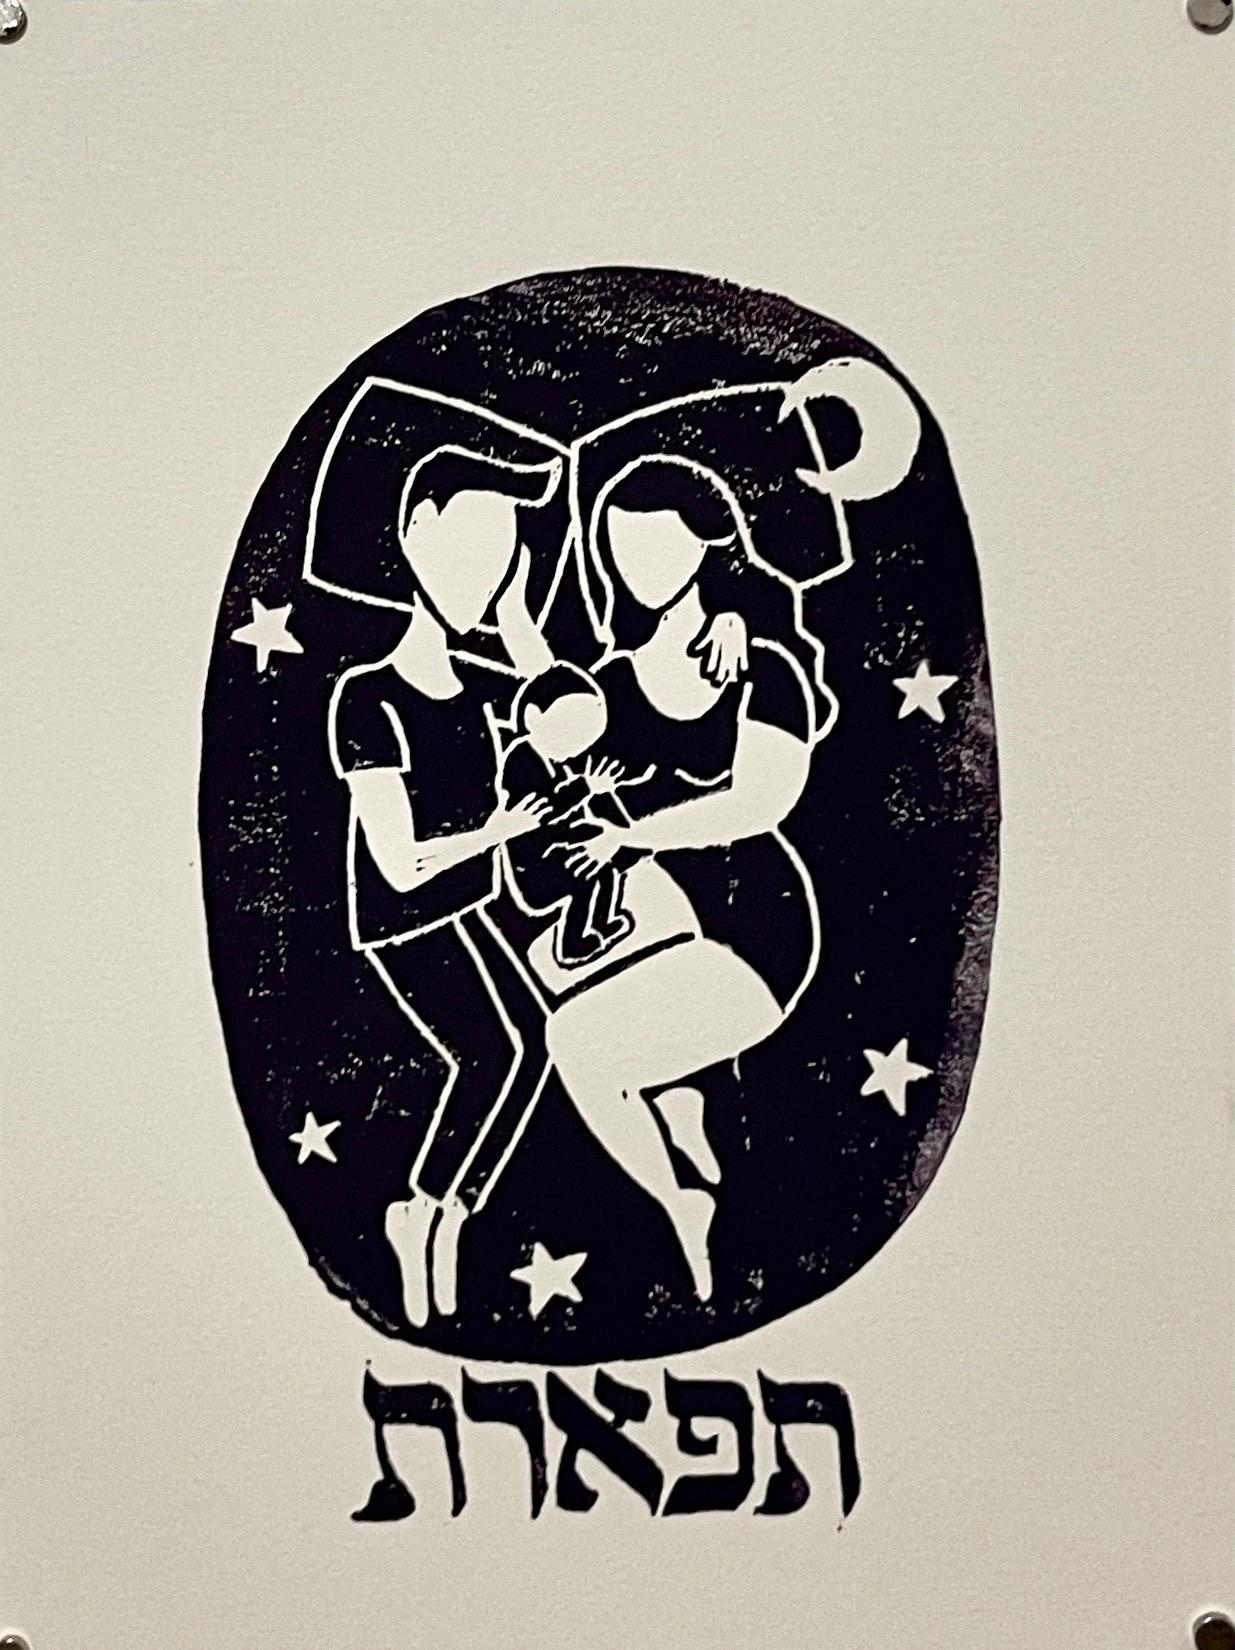 Basya Wuensch
Sefirot, Tiferet (beauty in harmony)
Family, 
2023
Hand printed color linocut on cold pressed watercolor paper
Hand signed and numbered
12 X 9 inches

Basya Wuensch Reiter is an accomplished contemporary female Chassidic artist who was